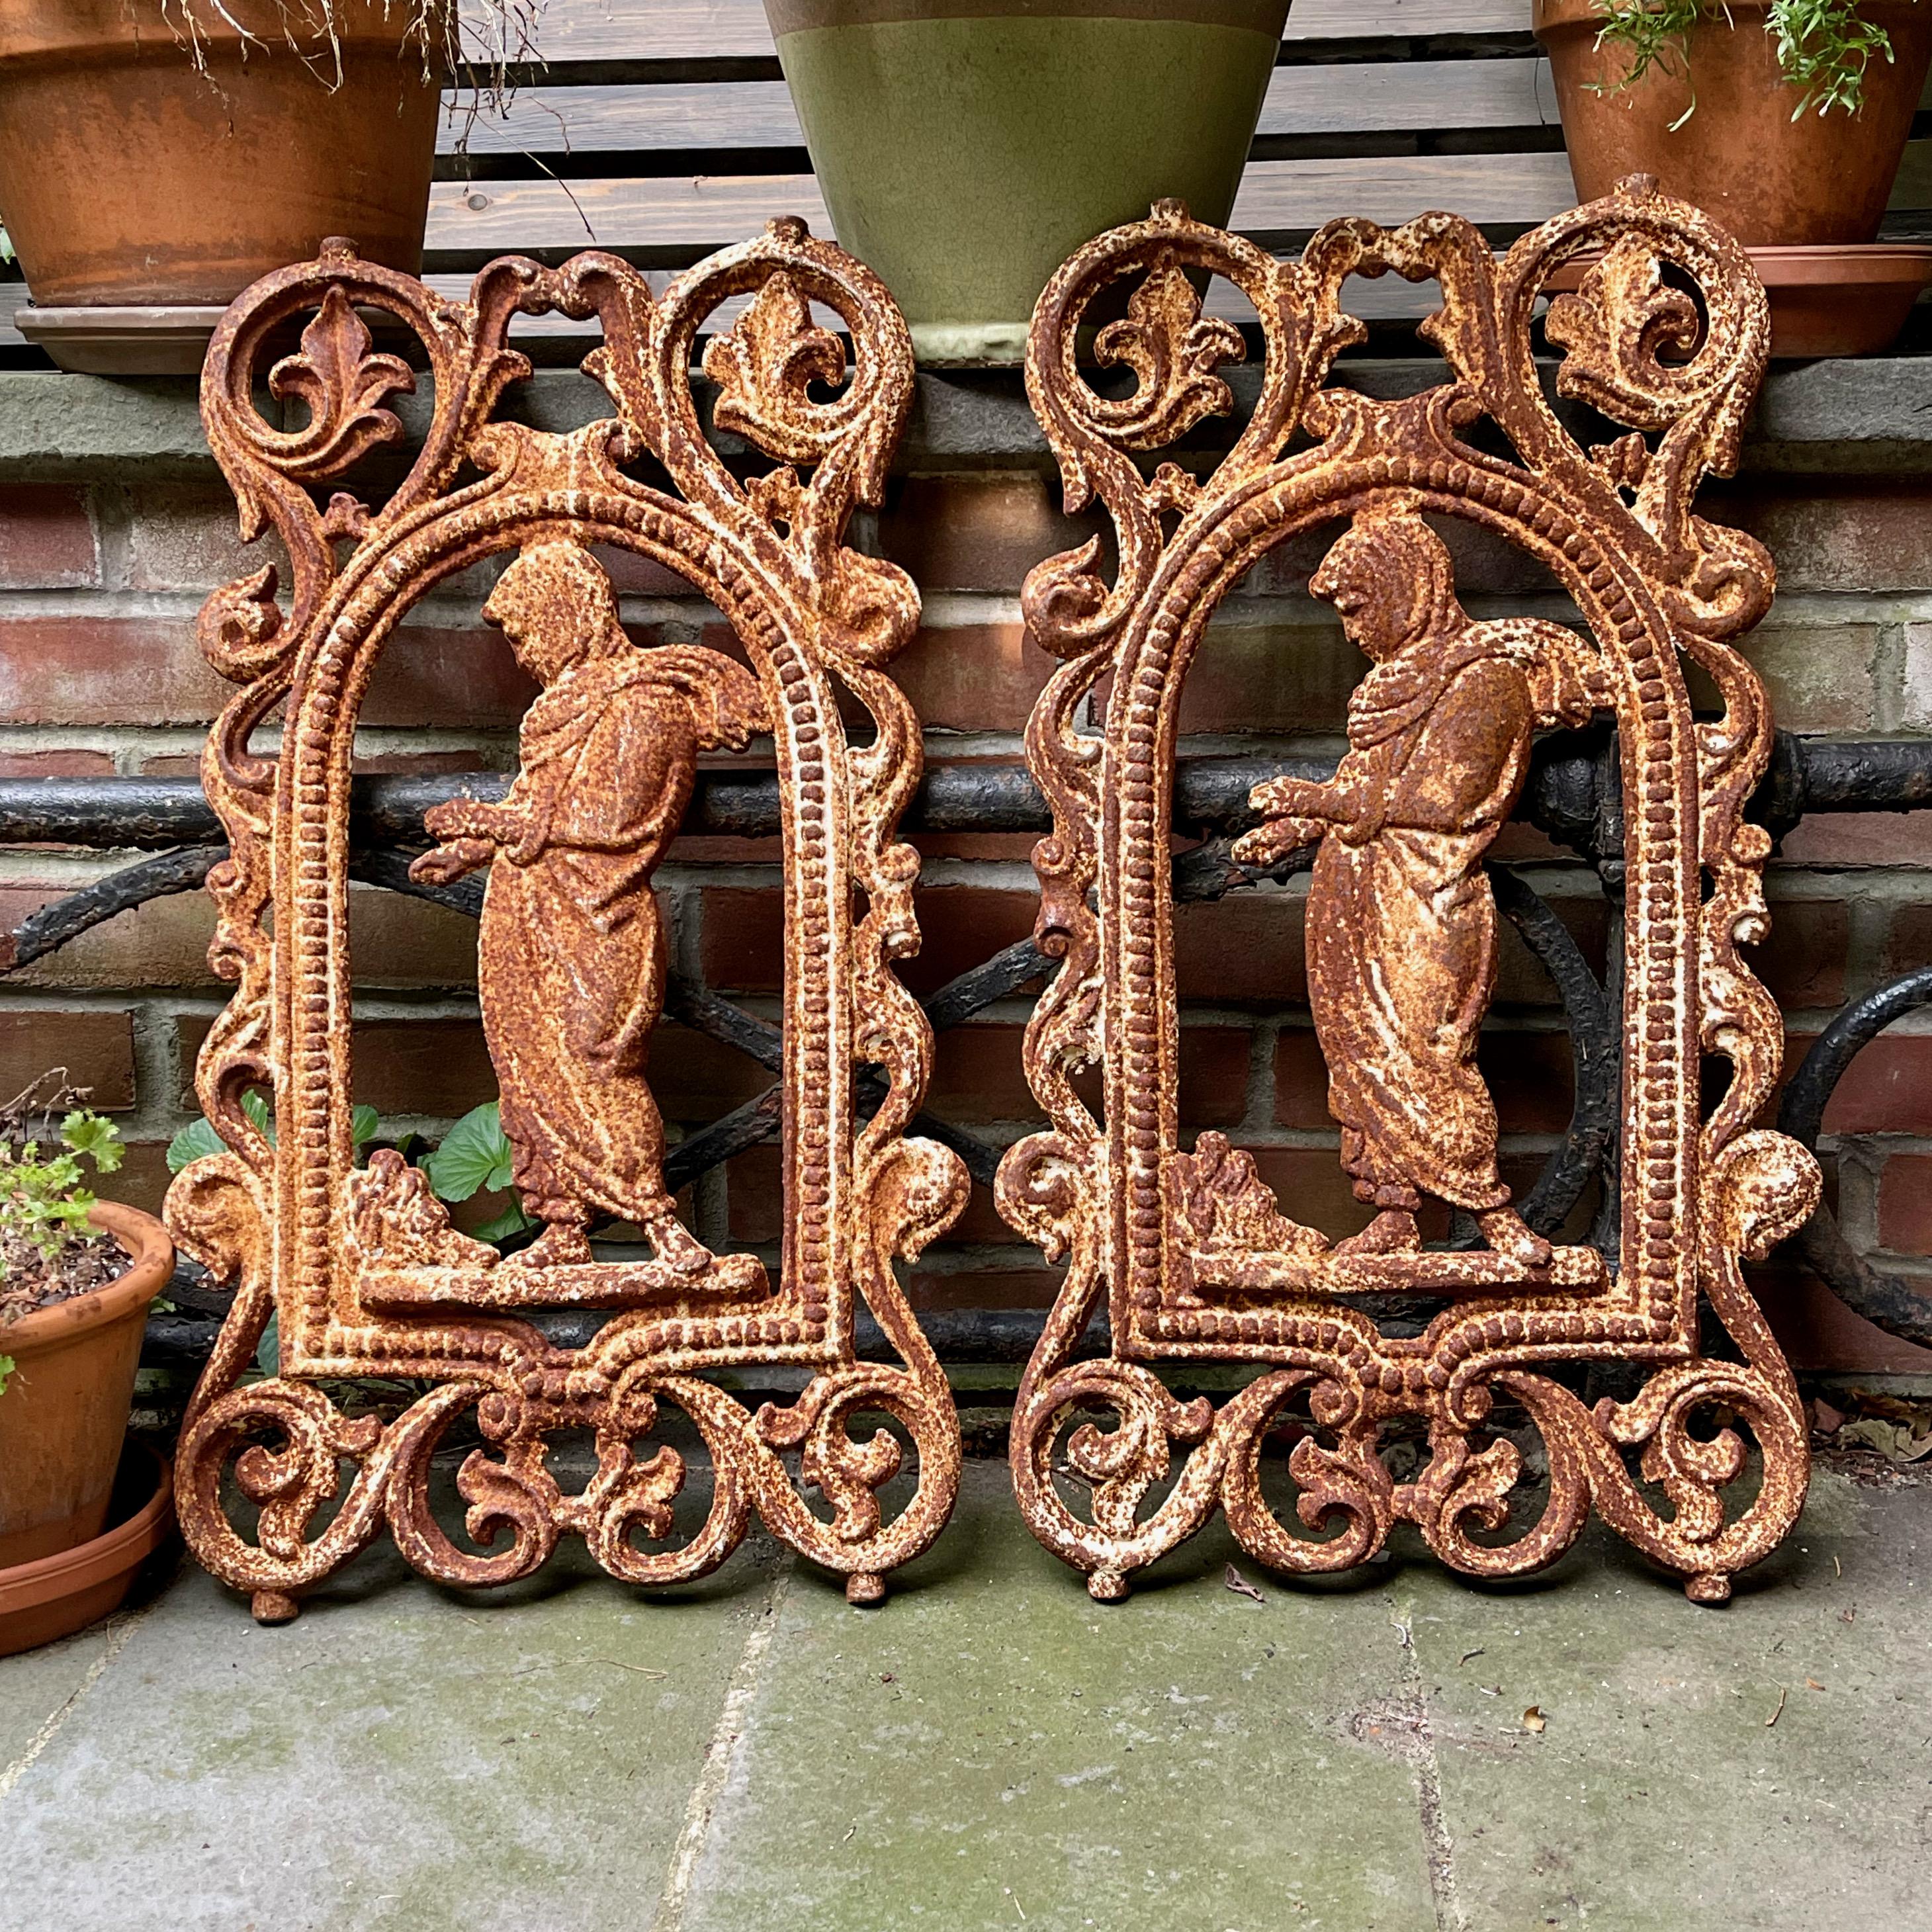 A cast iron flatback panel originally from a balcony rail in France.

Dating to the mid-late 19th century, these decorative objects were used as building or garden elements.
Heavy, weighing about 25 pounds, and aged with a beautiful patina, the